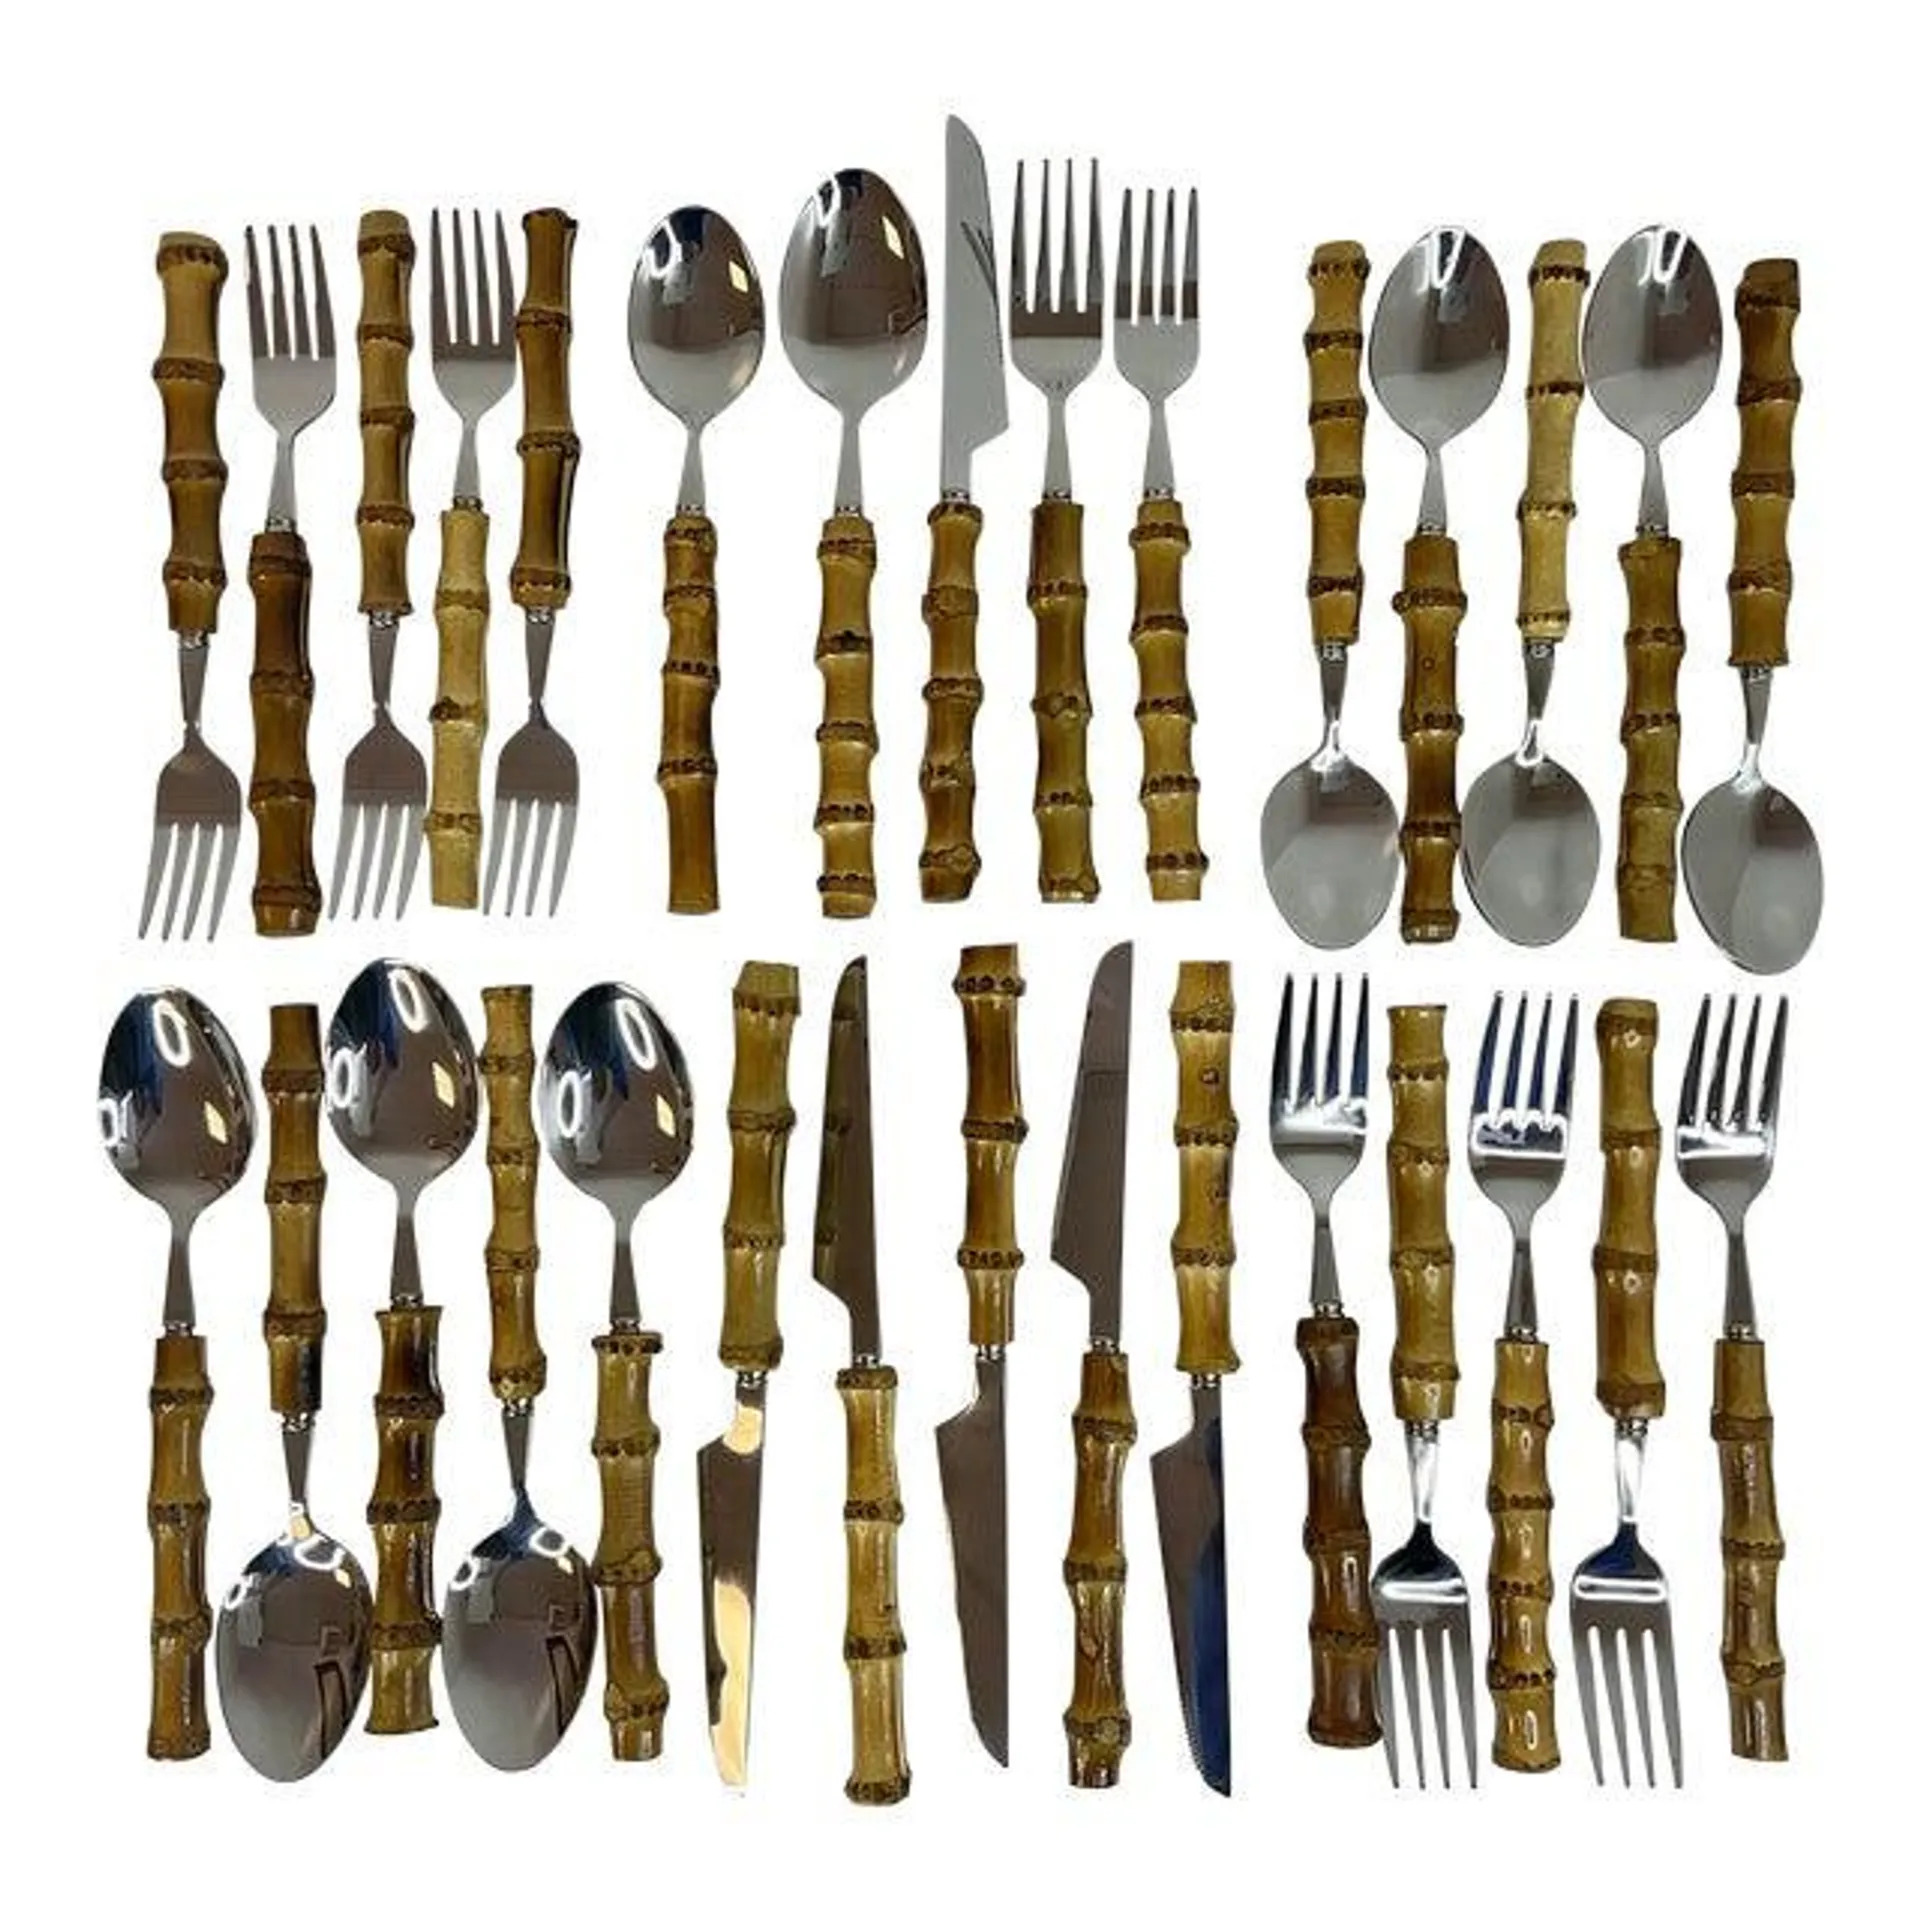 Chinoiserie Bamboo 18/8 Stainless Flatware, 5 Pcs Place Setting- 30 Total Pcs, Service for 6